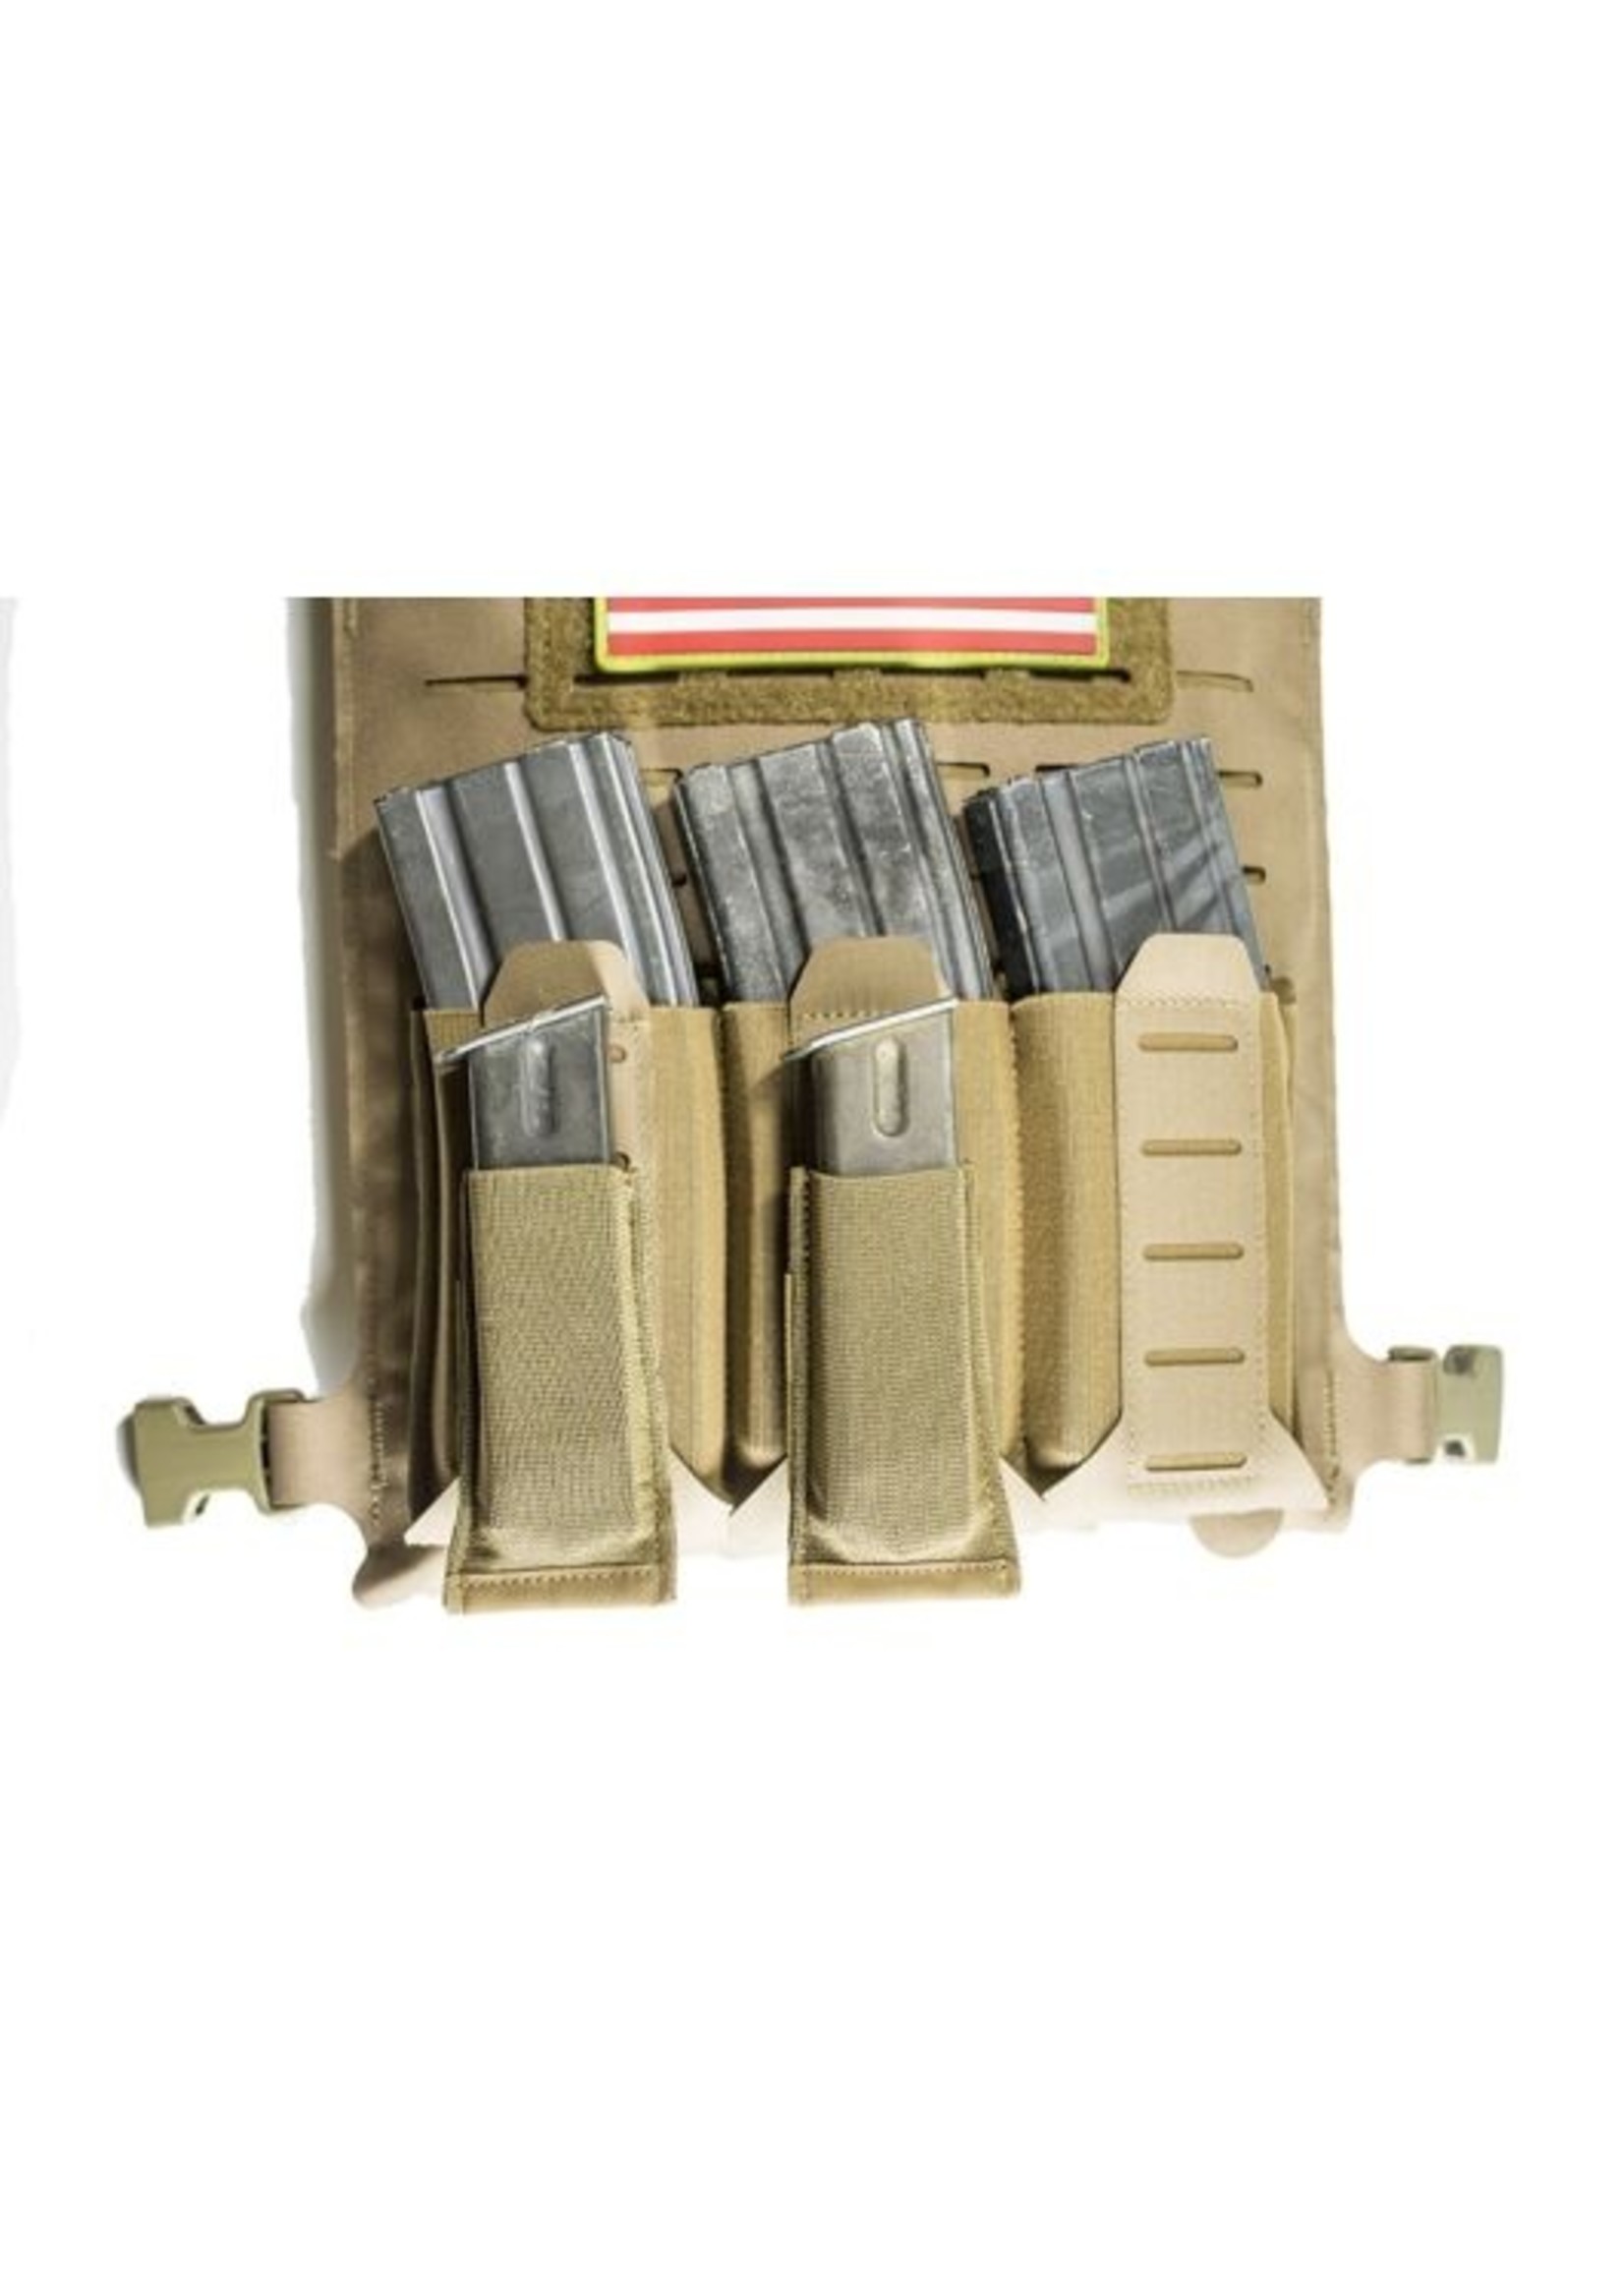 BLUE FORCE GEAR STACKABLE TEN-SPEED  SINGLE M4 MAG POUCH